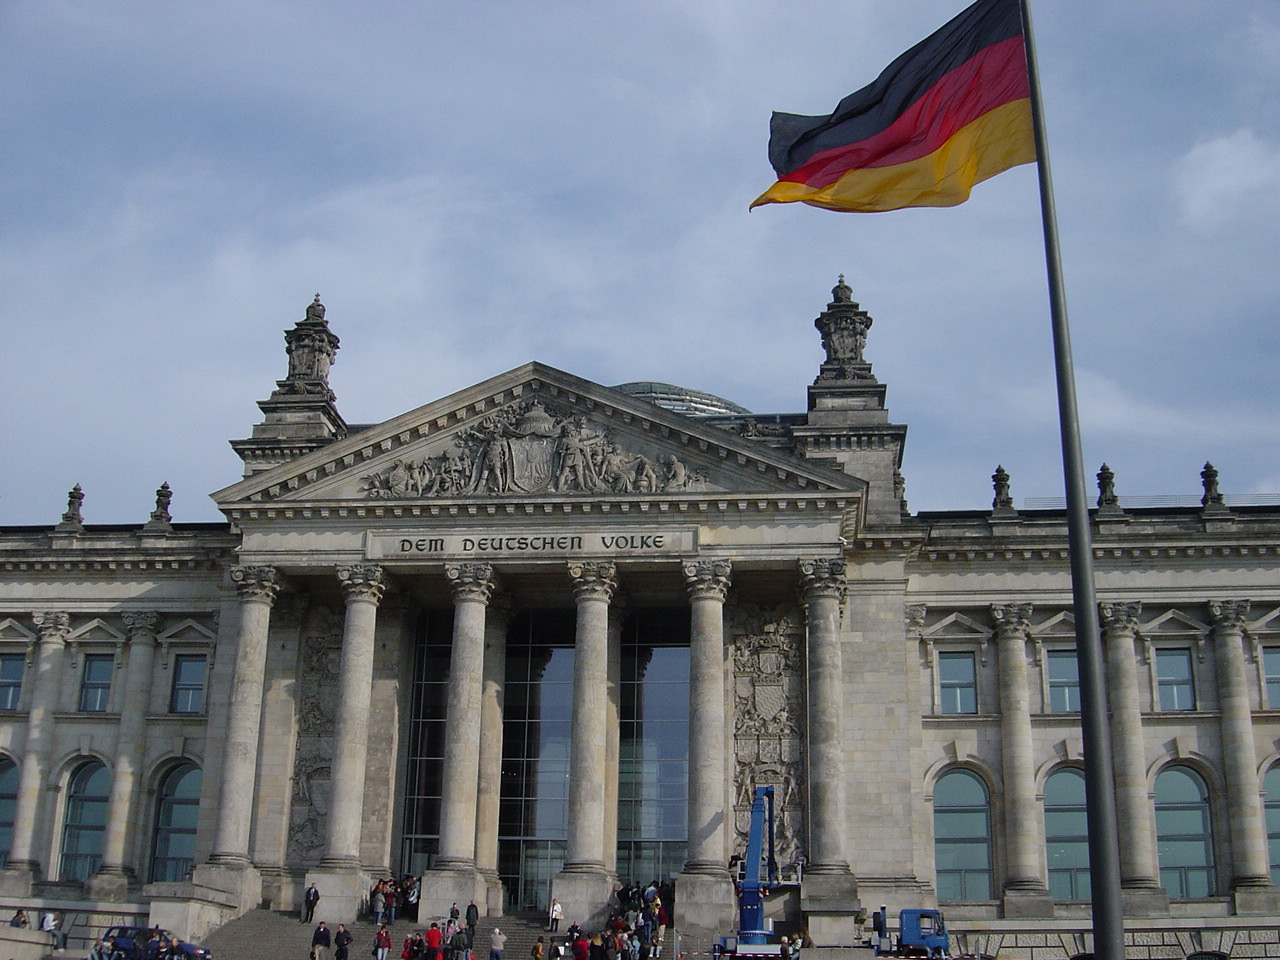 hCcAMcc[Reichstag]